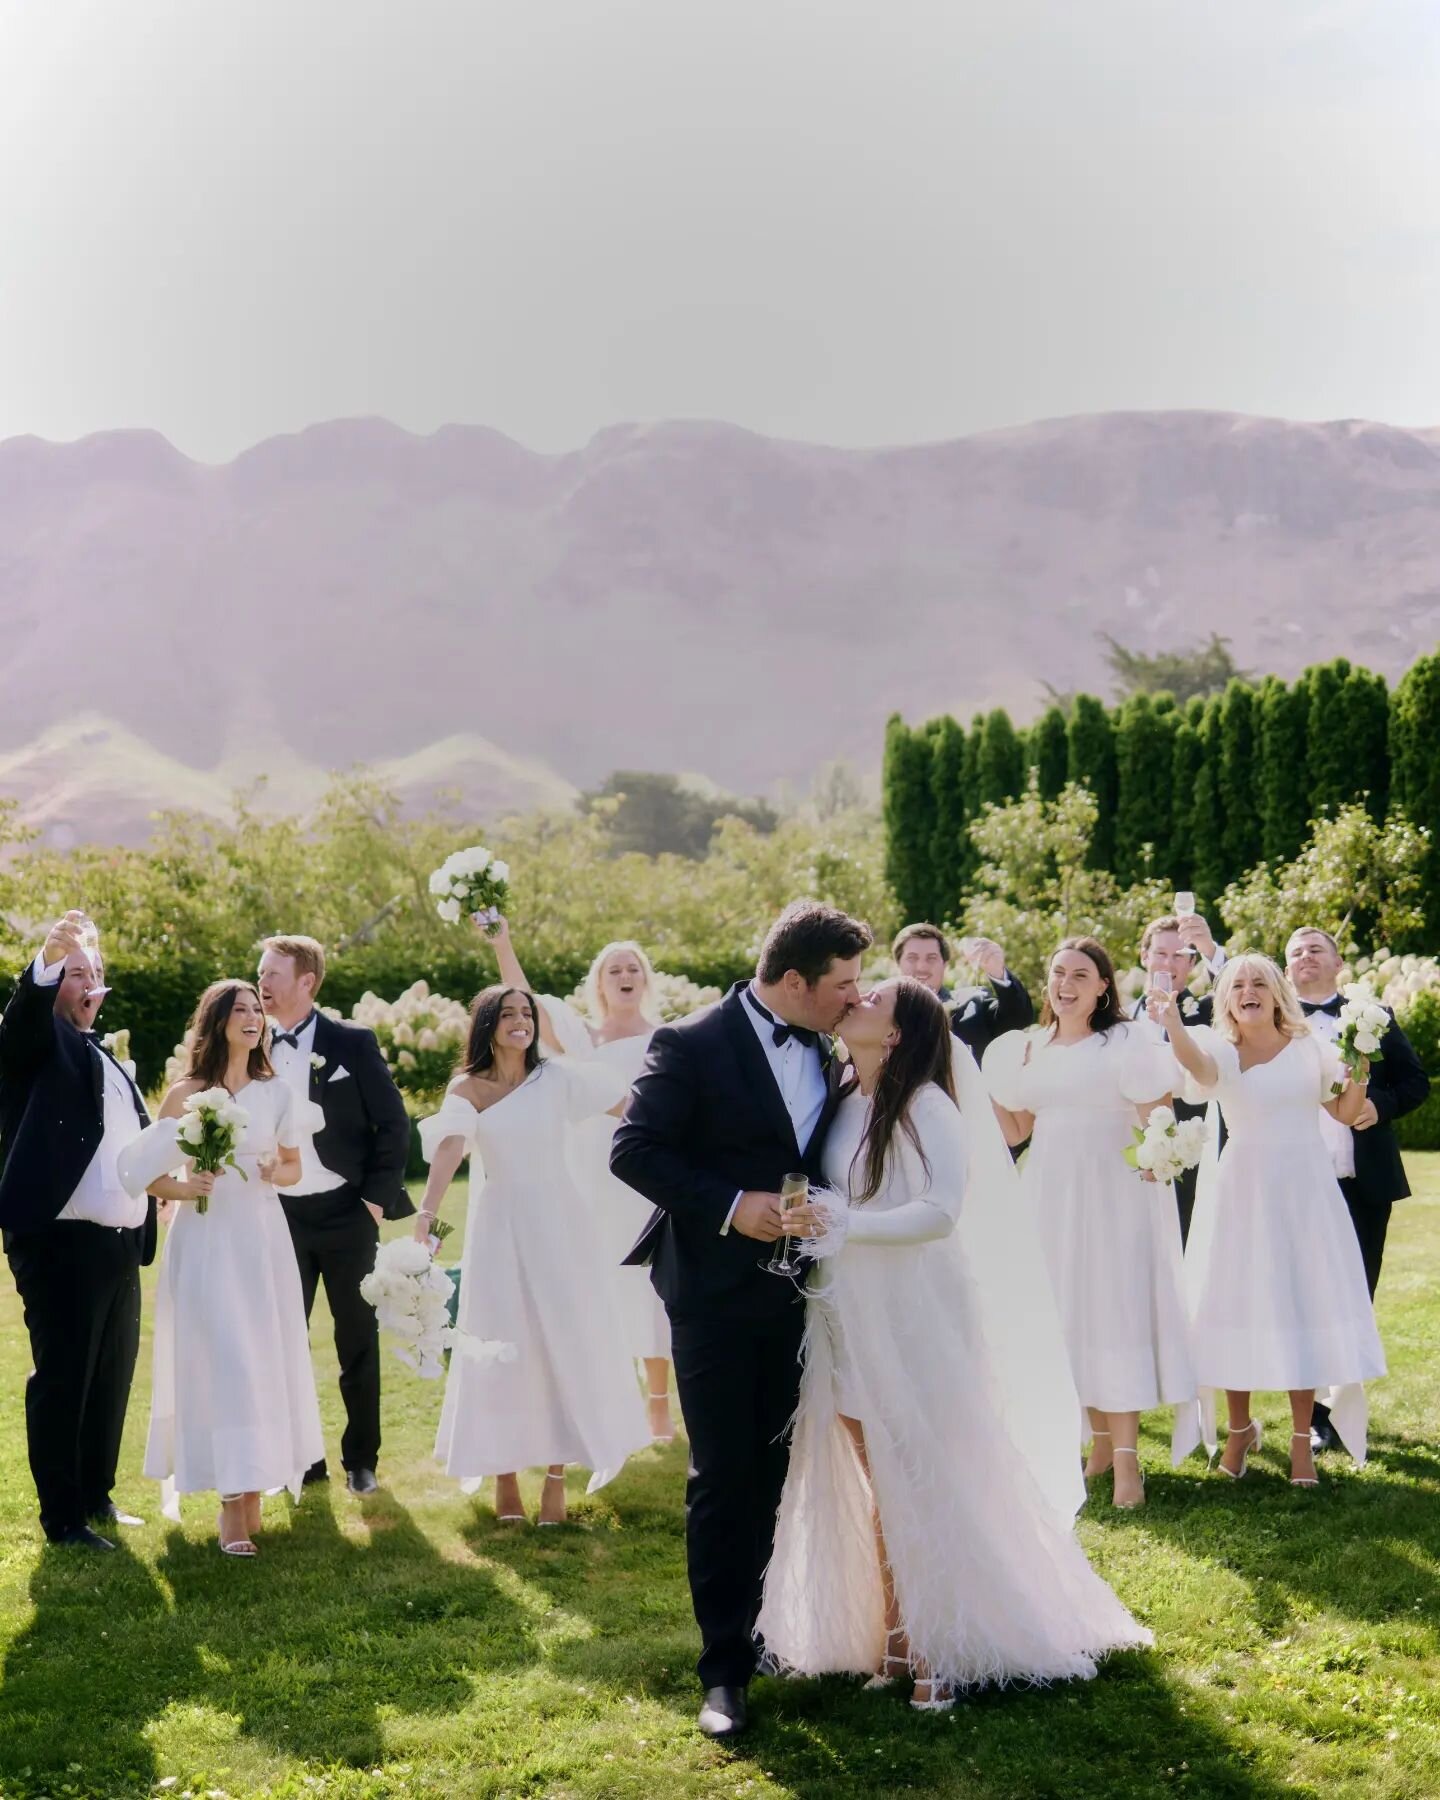 When an entire wedding of Aussies fly across the ditch to celebrate over some Hawkes Bay goodness. 🥂🍇

Laura and Jordie at @craggyrange 

📷 Captured by @jonnyscottphoto